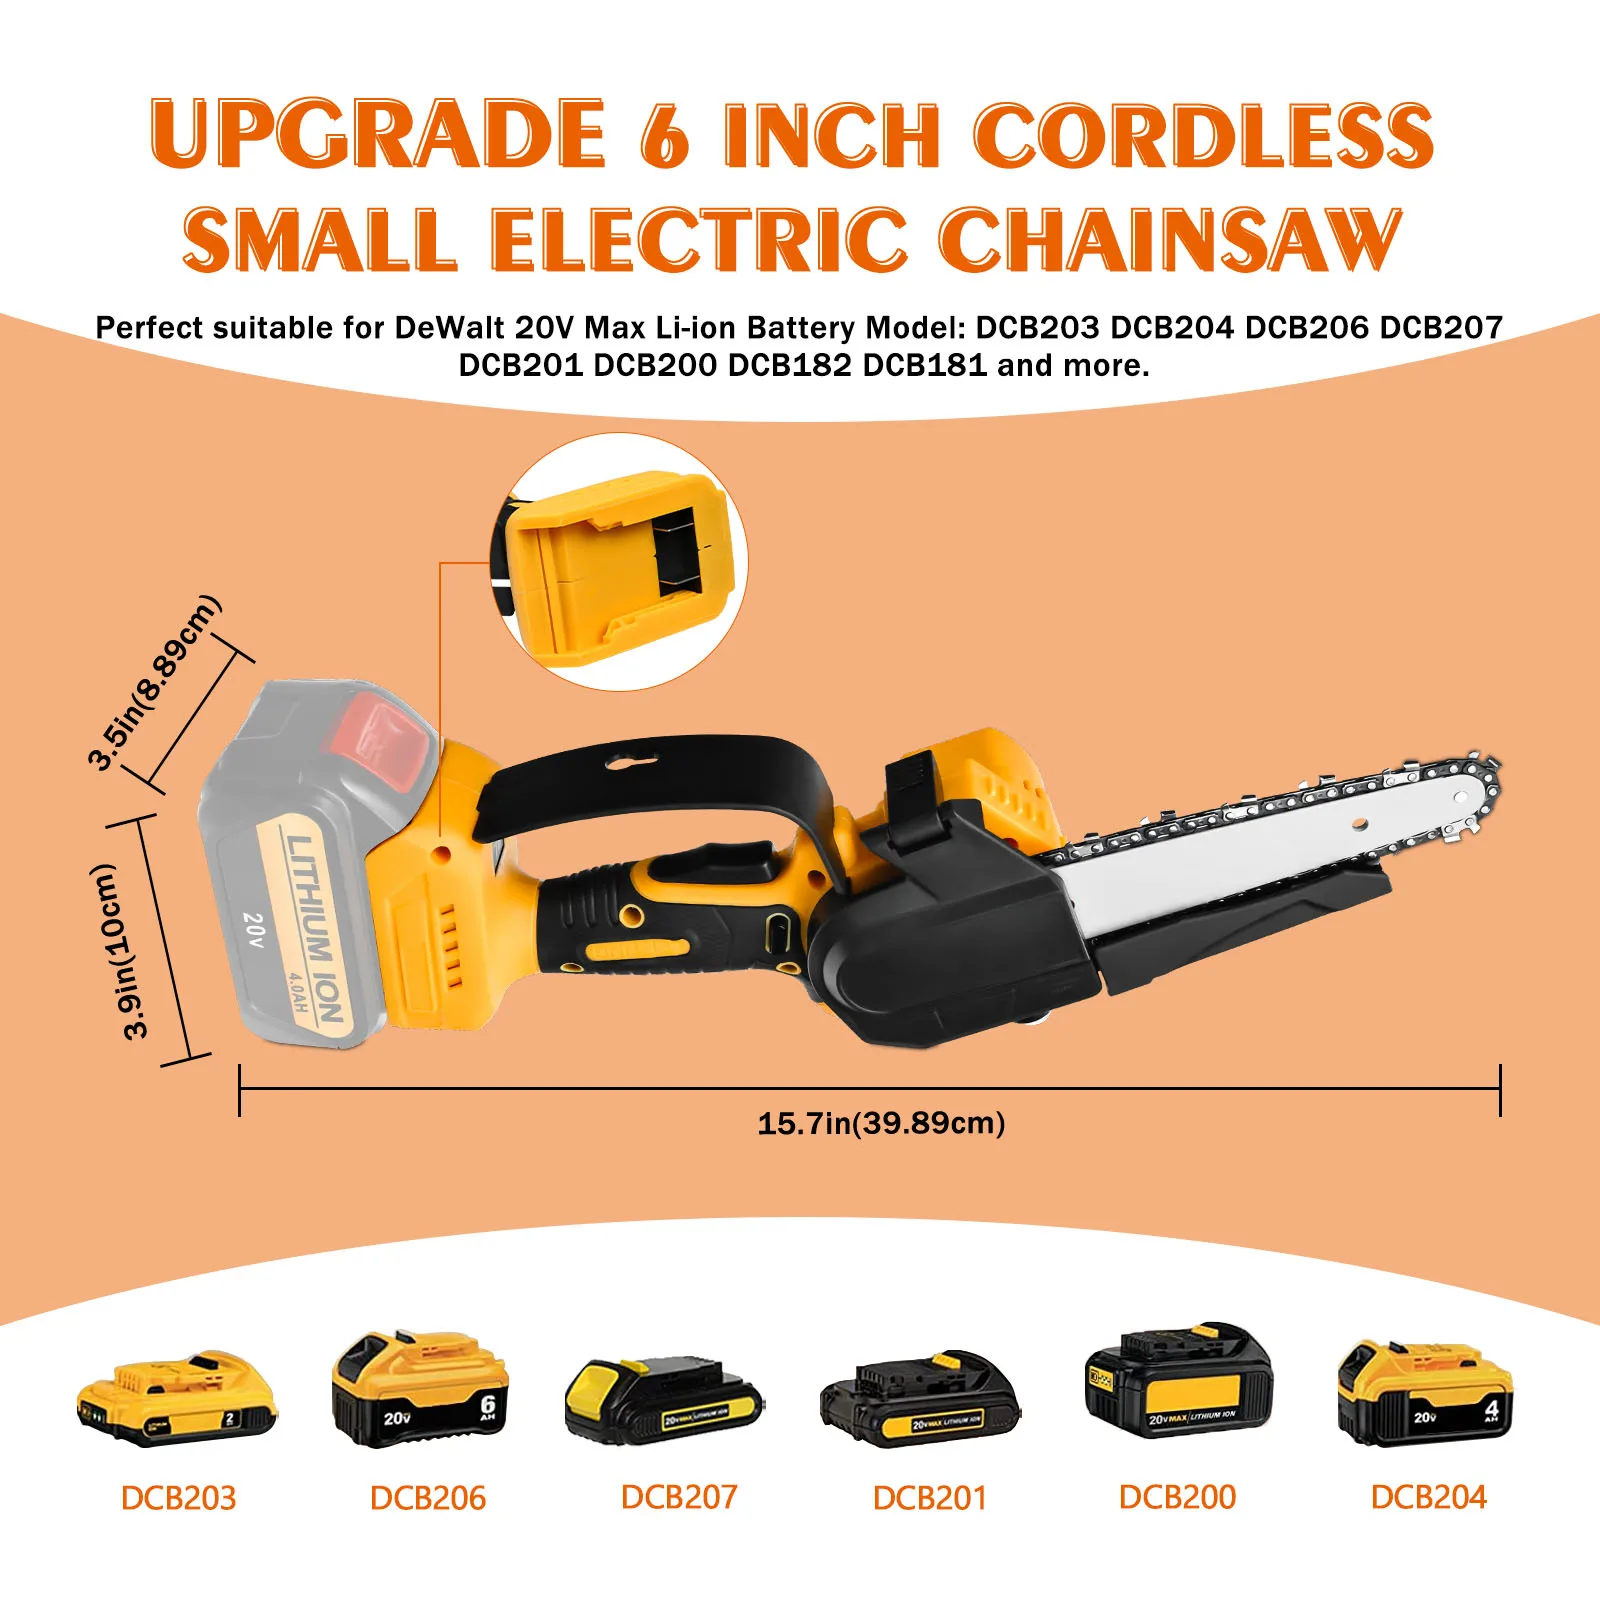 550W 6Inch Brushless Chainsaw Handheld Small Electric Saw Cordless Garden Cutting Tool for Dewalt 20V Battery (No Battery) images - 6